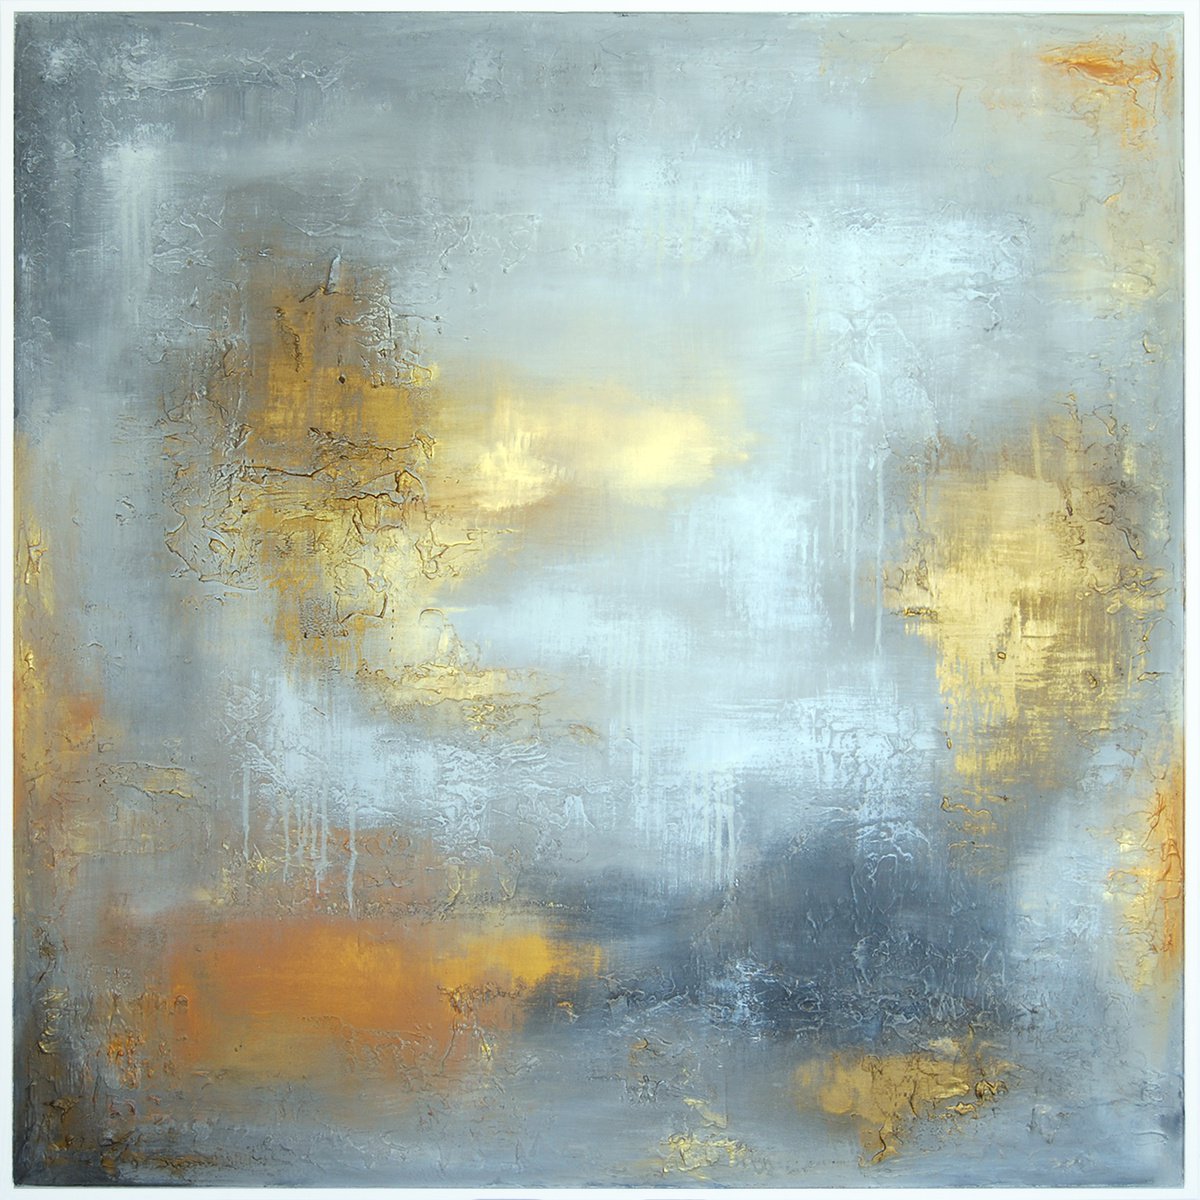 Abstract art - RICHNESS AND FAME - LARGE SQUARED 42 X 42 ABSTRACT LANDSCAPE by VANADA ABSTRACT ART